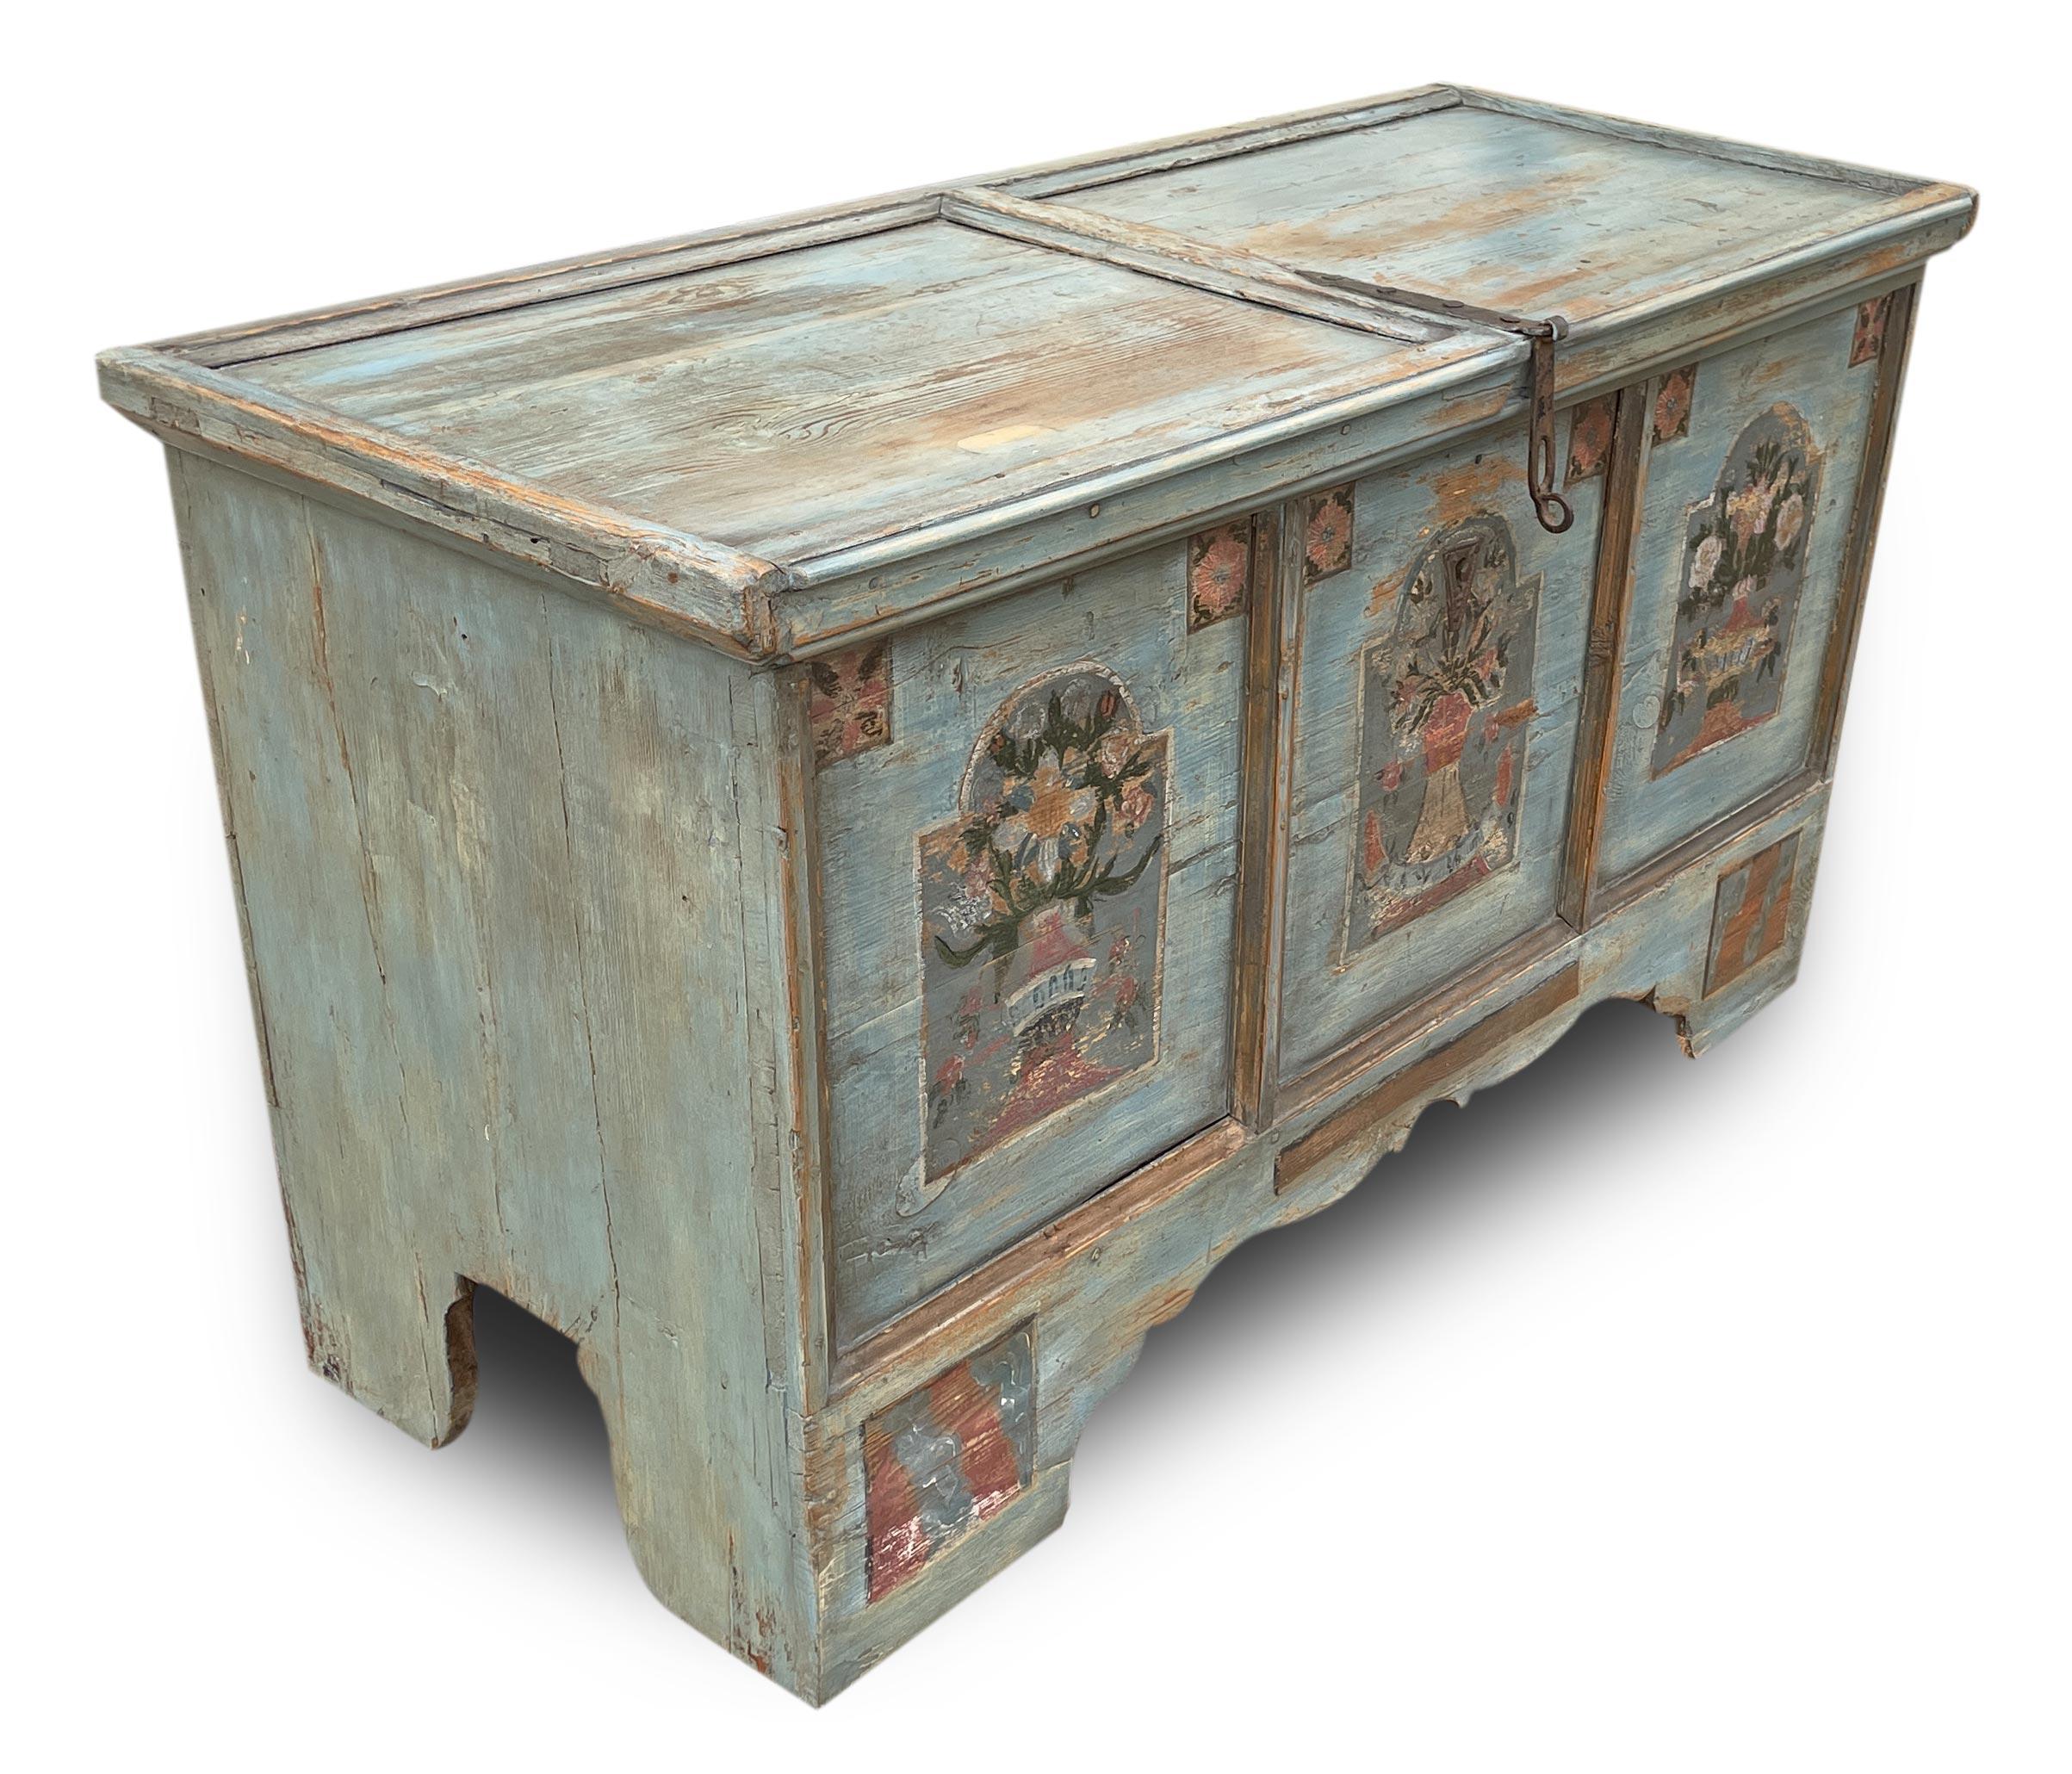 Tyrolean (Northern Italy Alpine Region) light blue painted chest

Measurements: H. 81cm – L. 142cm – D. 59cm
Period: approximately 1780
Origin: Tyrol
Essence: Fir

Tyrolean chest entirely painted in intense blue.
The front is divided into three